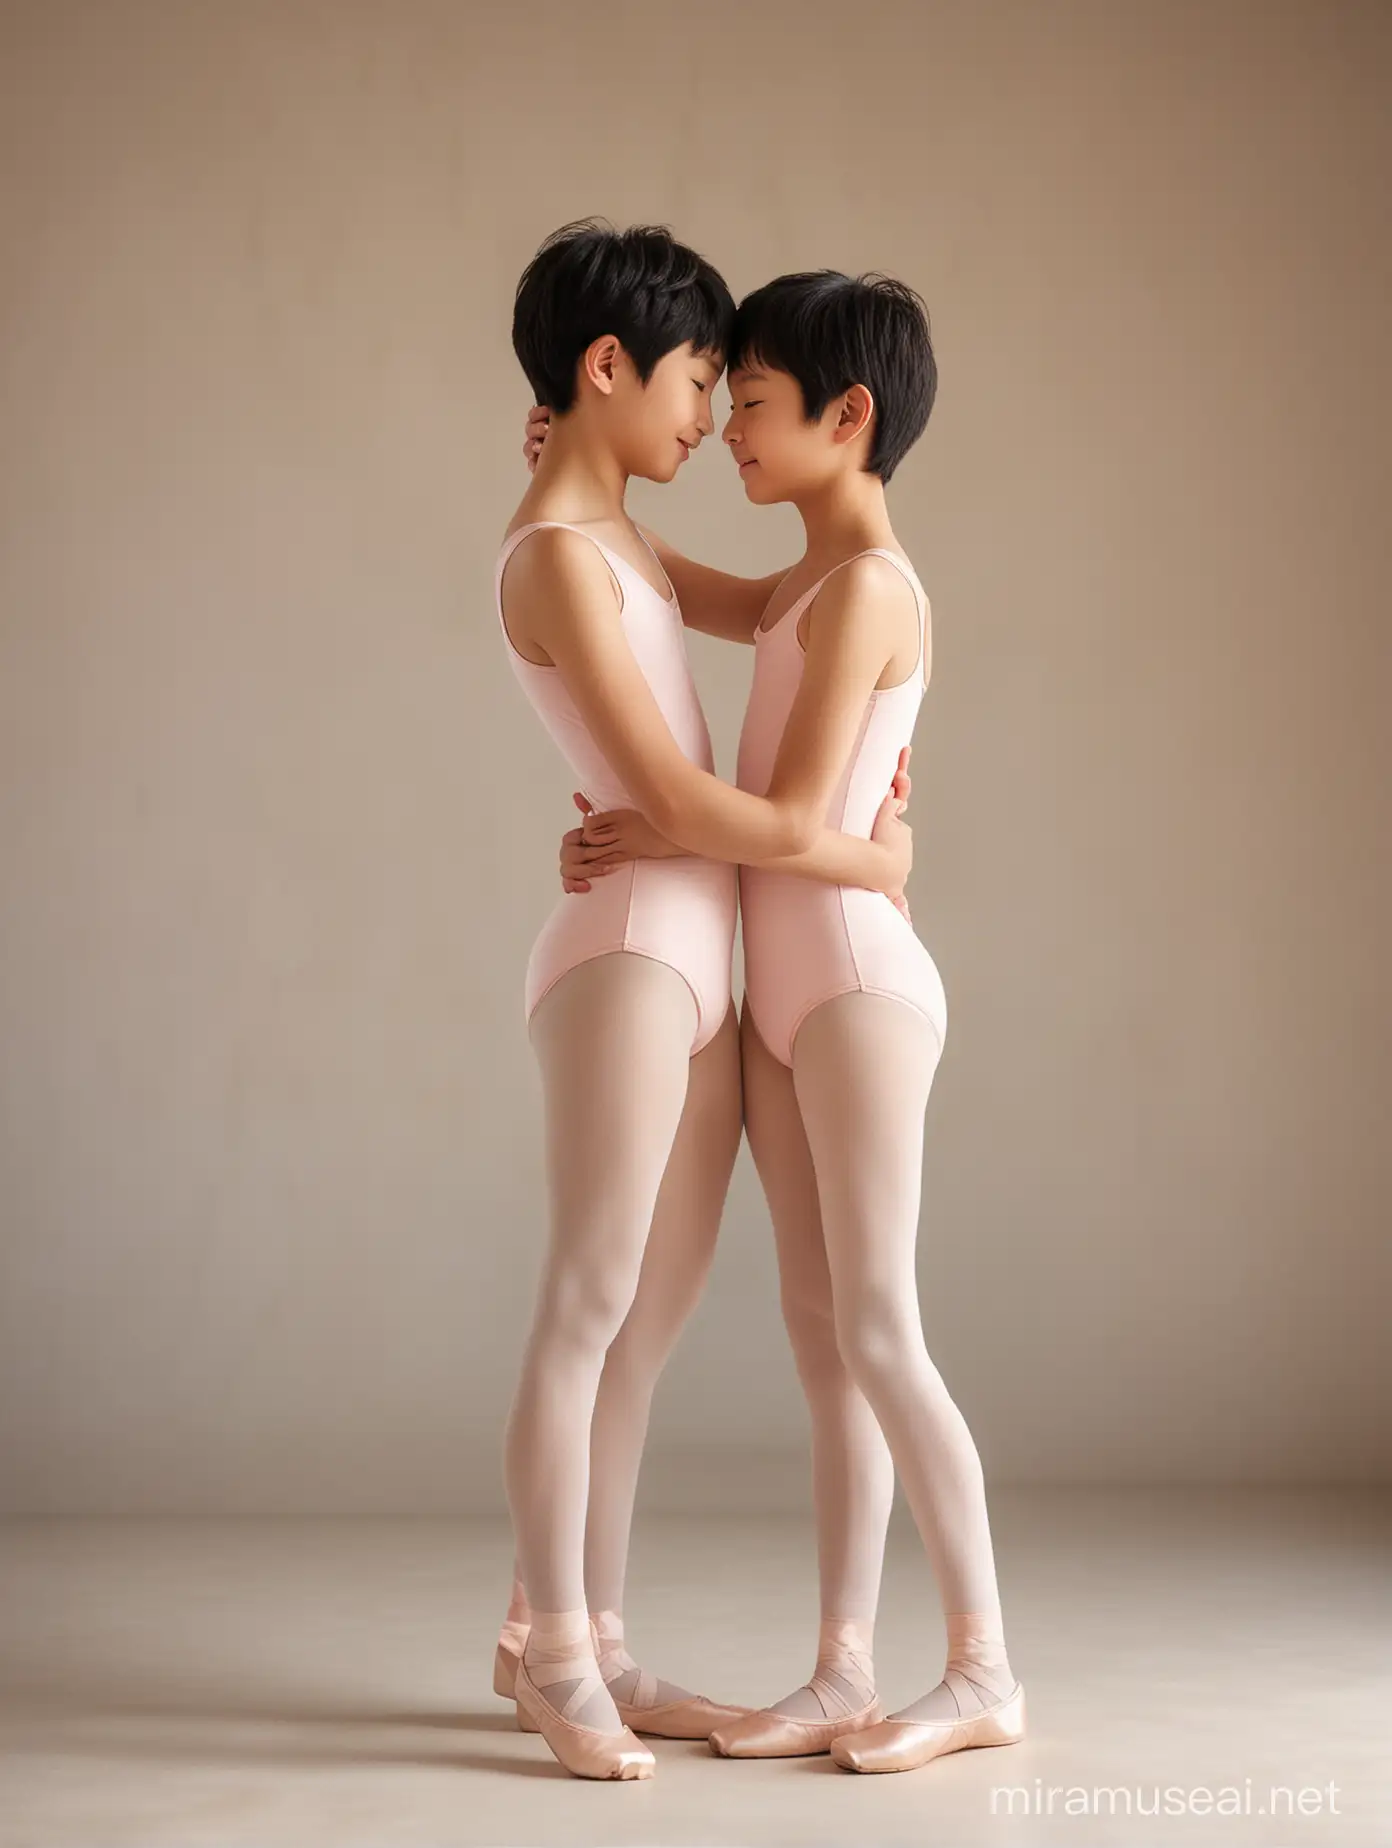 photorealistic, two 12-year-old Japanese boys with short black hair, wearing cute ballet leotards and tights, embracing lovingly in a ballet studio